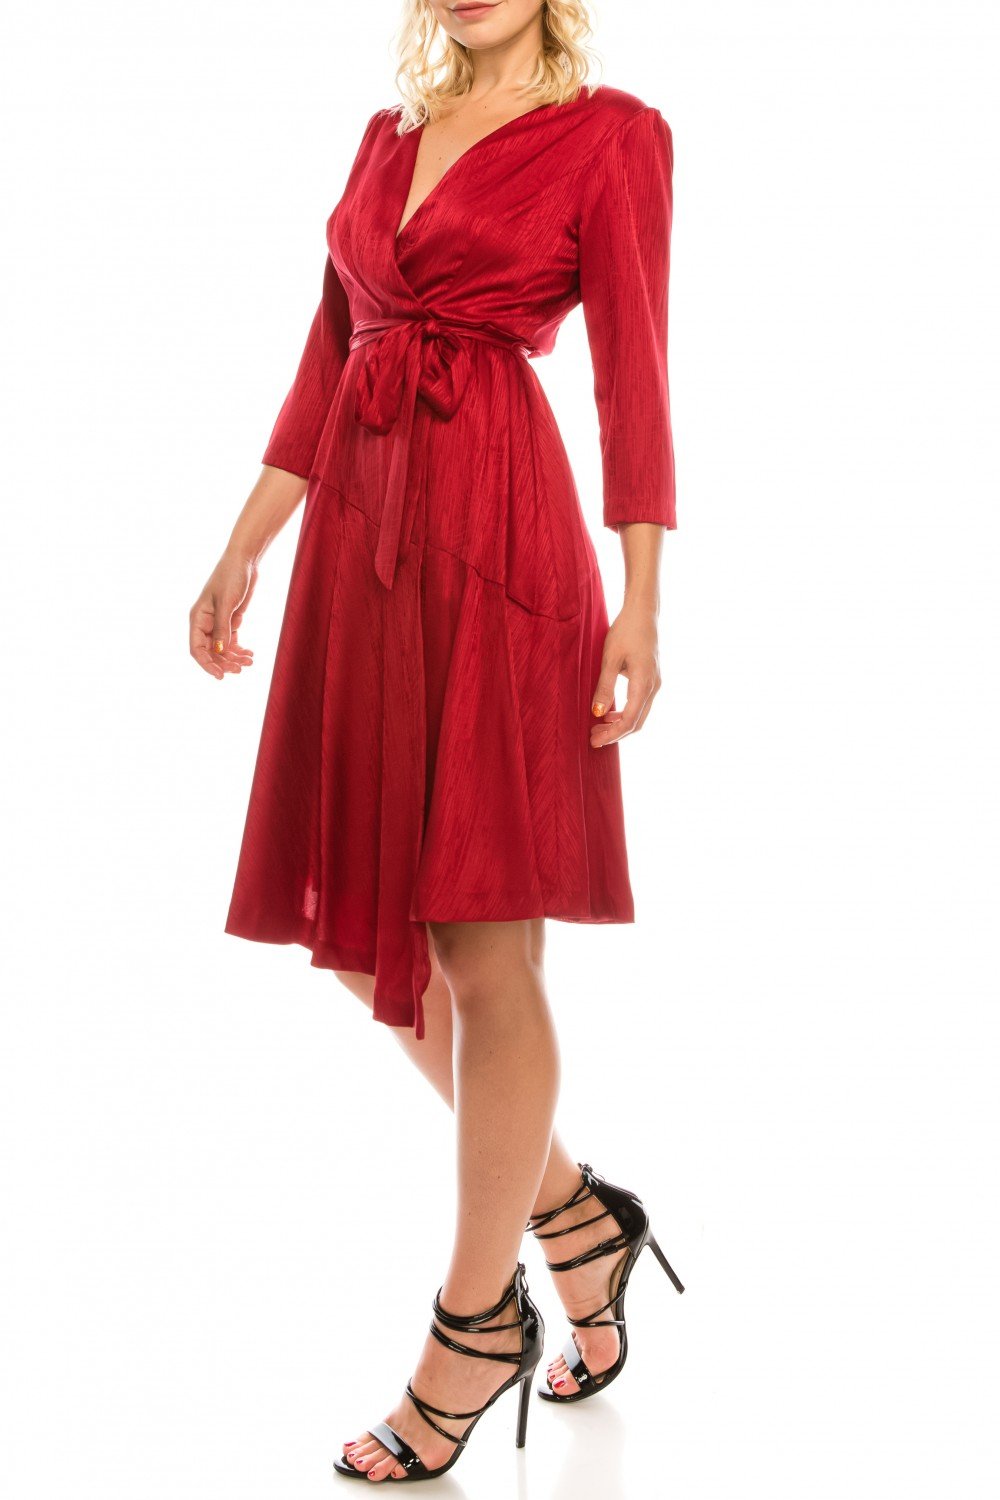 London Times - T4896M Three Quarter Sleeve Twill Faux Wrap Dress In Red